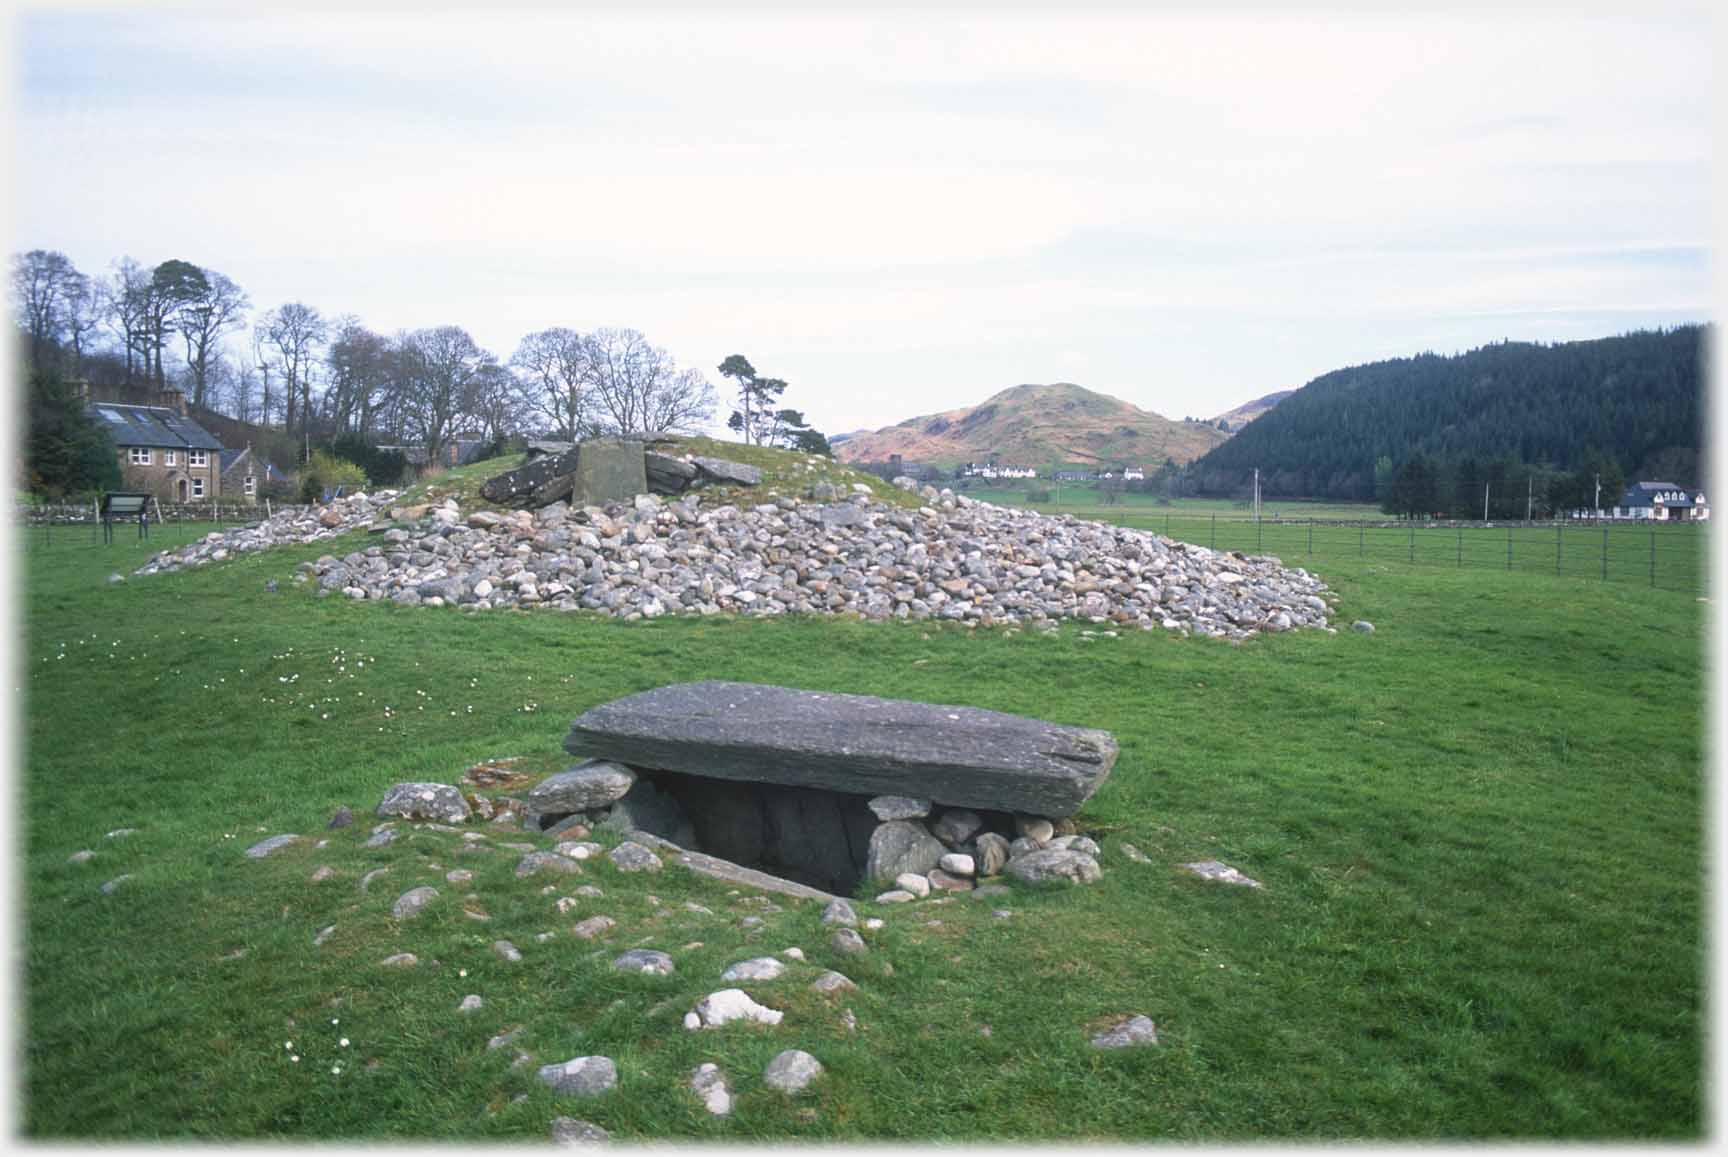 Mound of stones with grave in front.